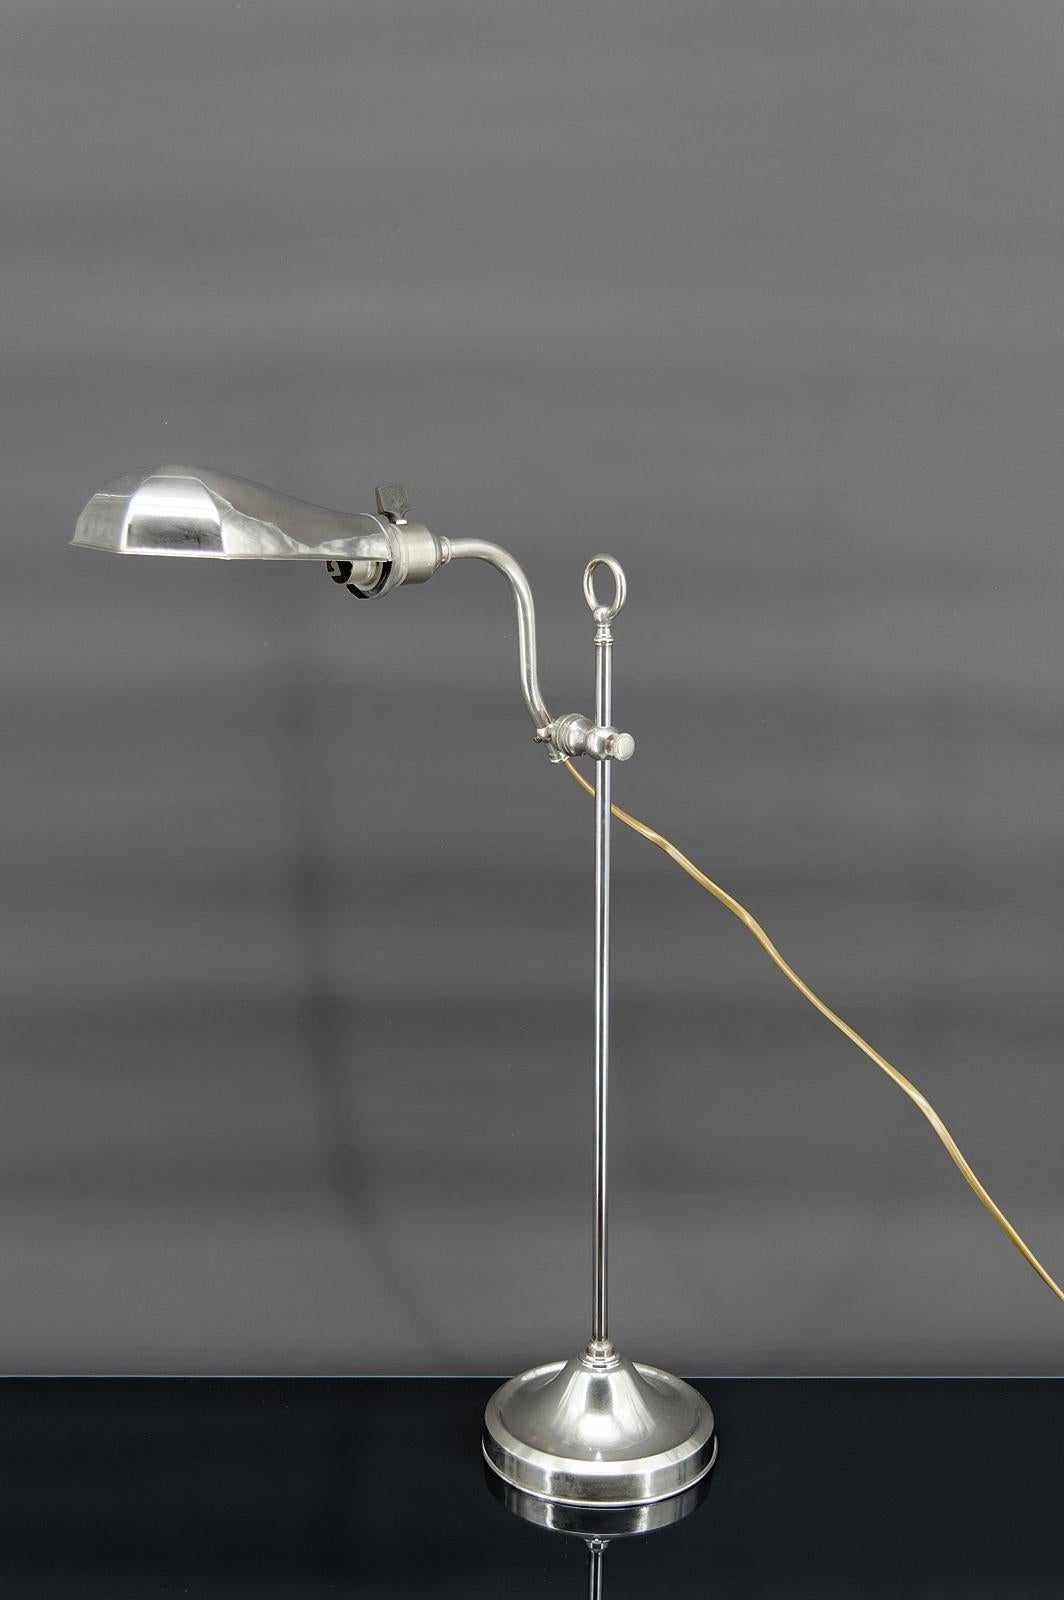 Workshop lamp in aluminum and nickel, adjustable with raise-and-lower system.
Industrial design 1900
France, circa 1900

In very good condition, new electricity.

Dimensions:
height 60 cm
width 15 cm
depth 40 cm